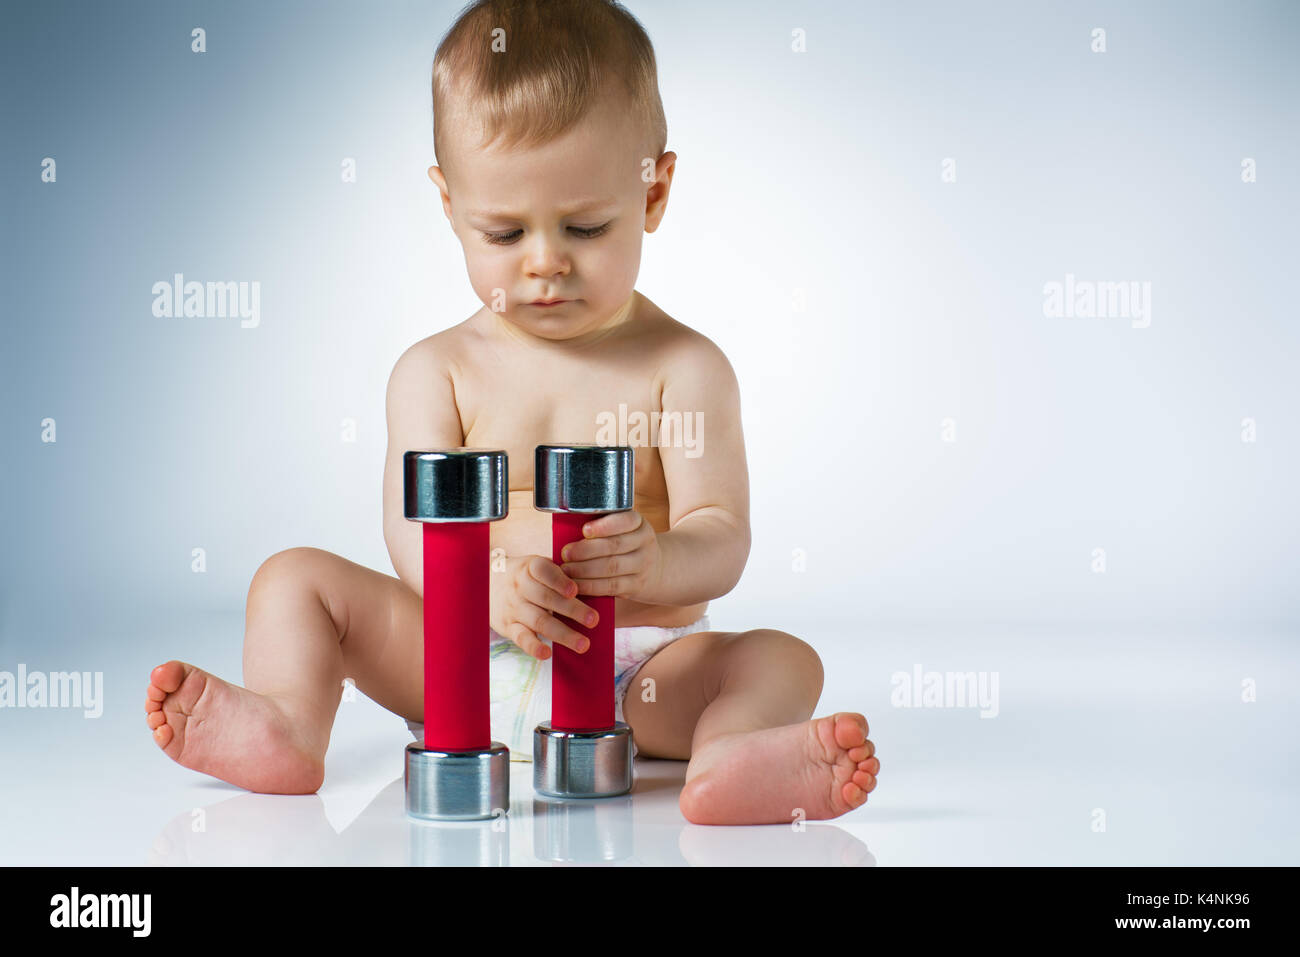 Eight month baby sitting and playing with dumbbells on white background Stock Photo